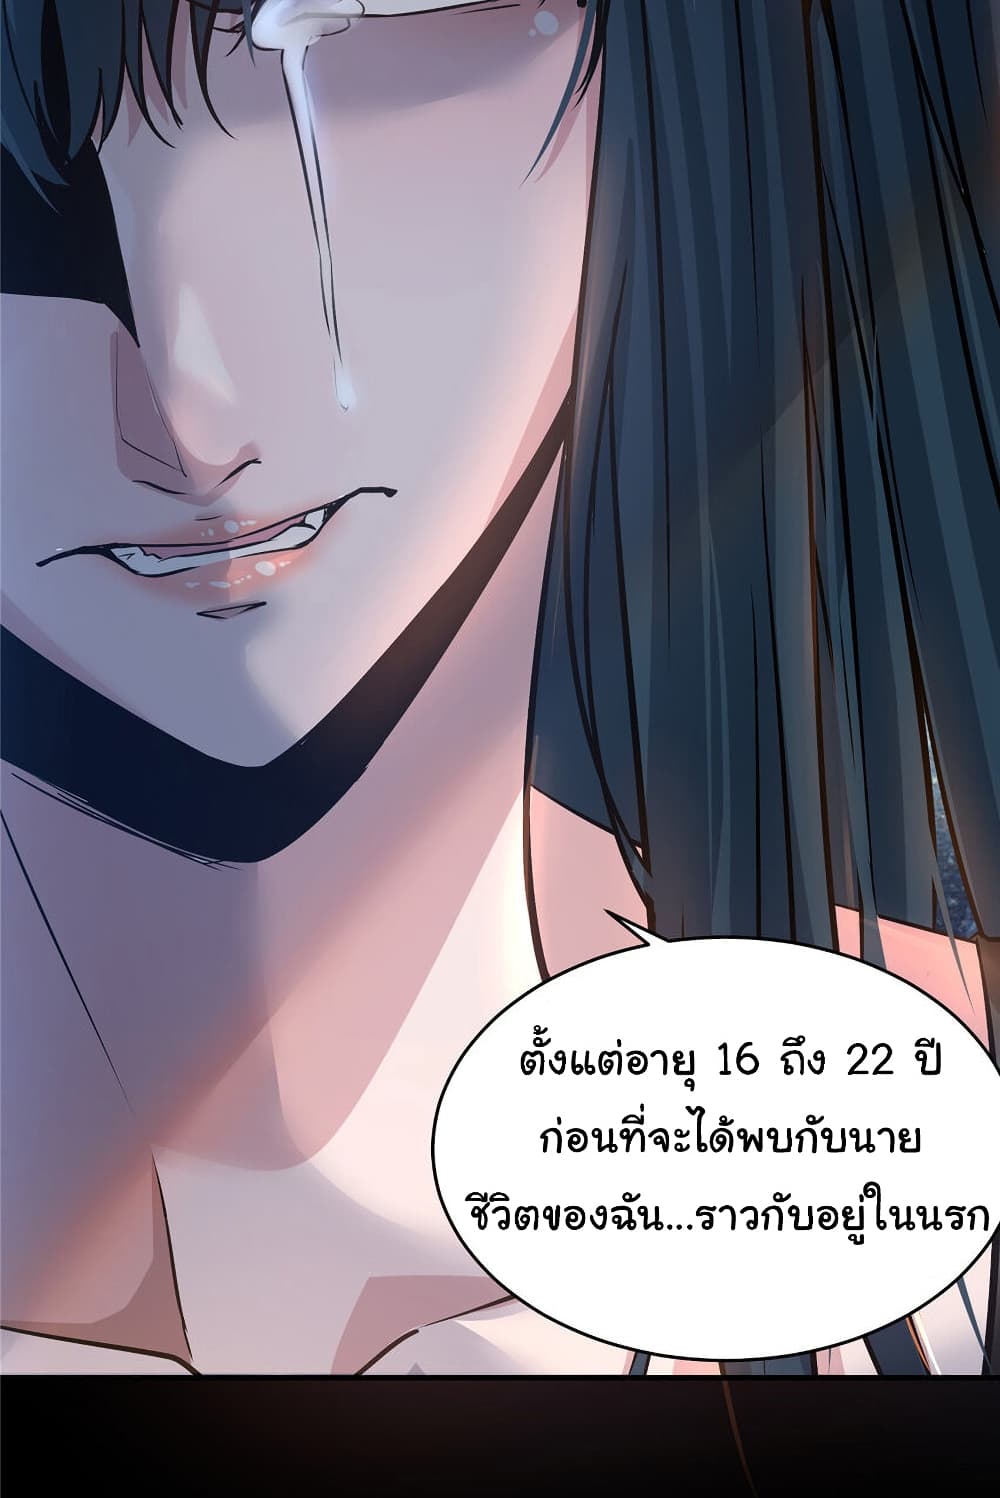 Live Steadily, Donโ€t Wave เธ•เธญเธเธ—เธตเน 8 (53)